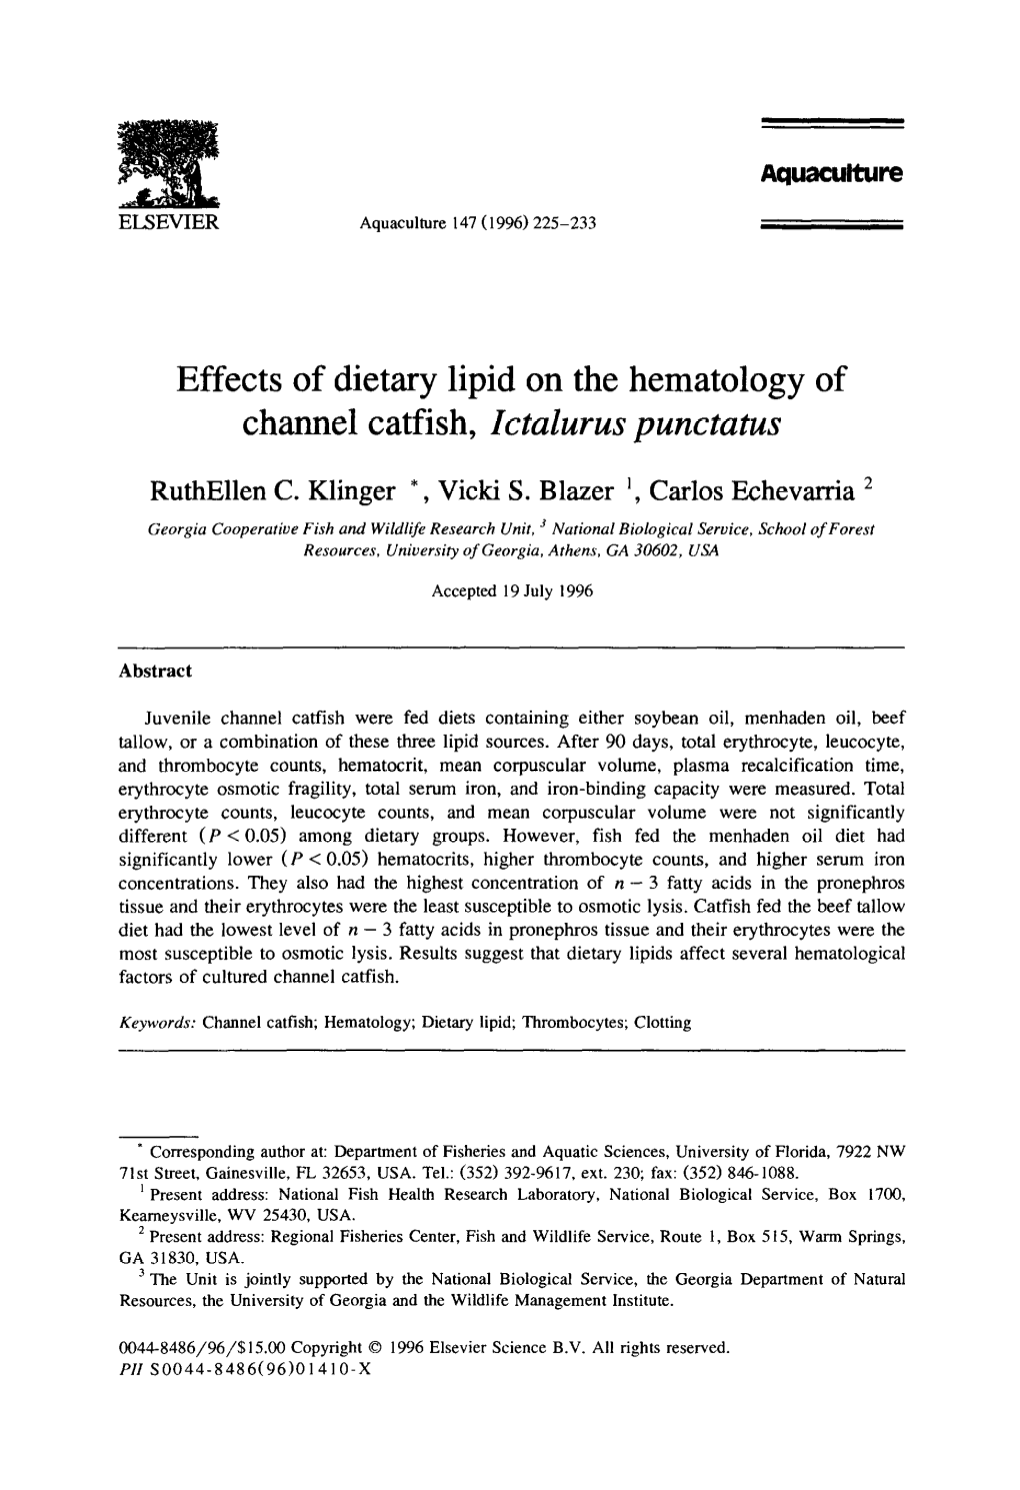 Effects of Dietary Lipid on the Hematology Channel Catfish